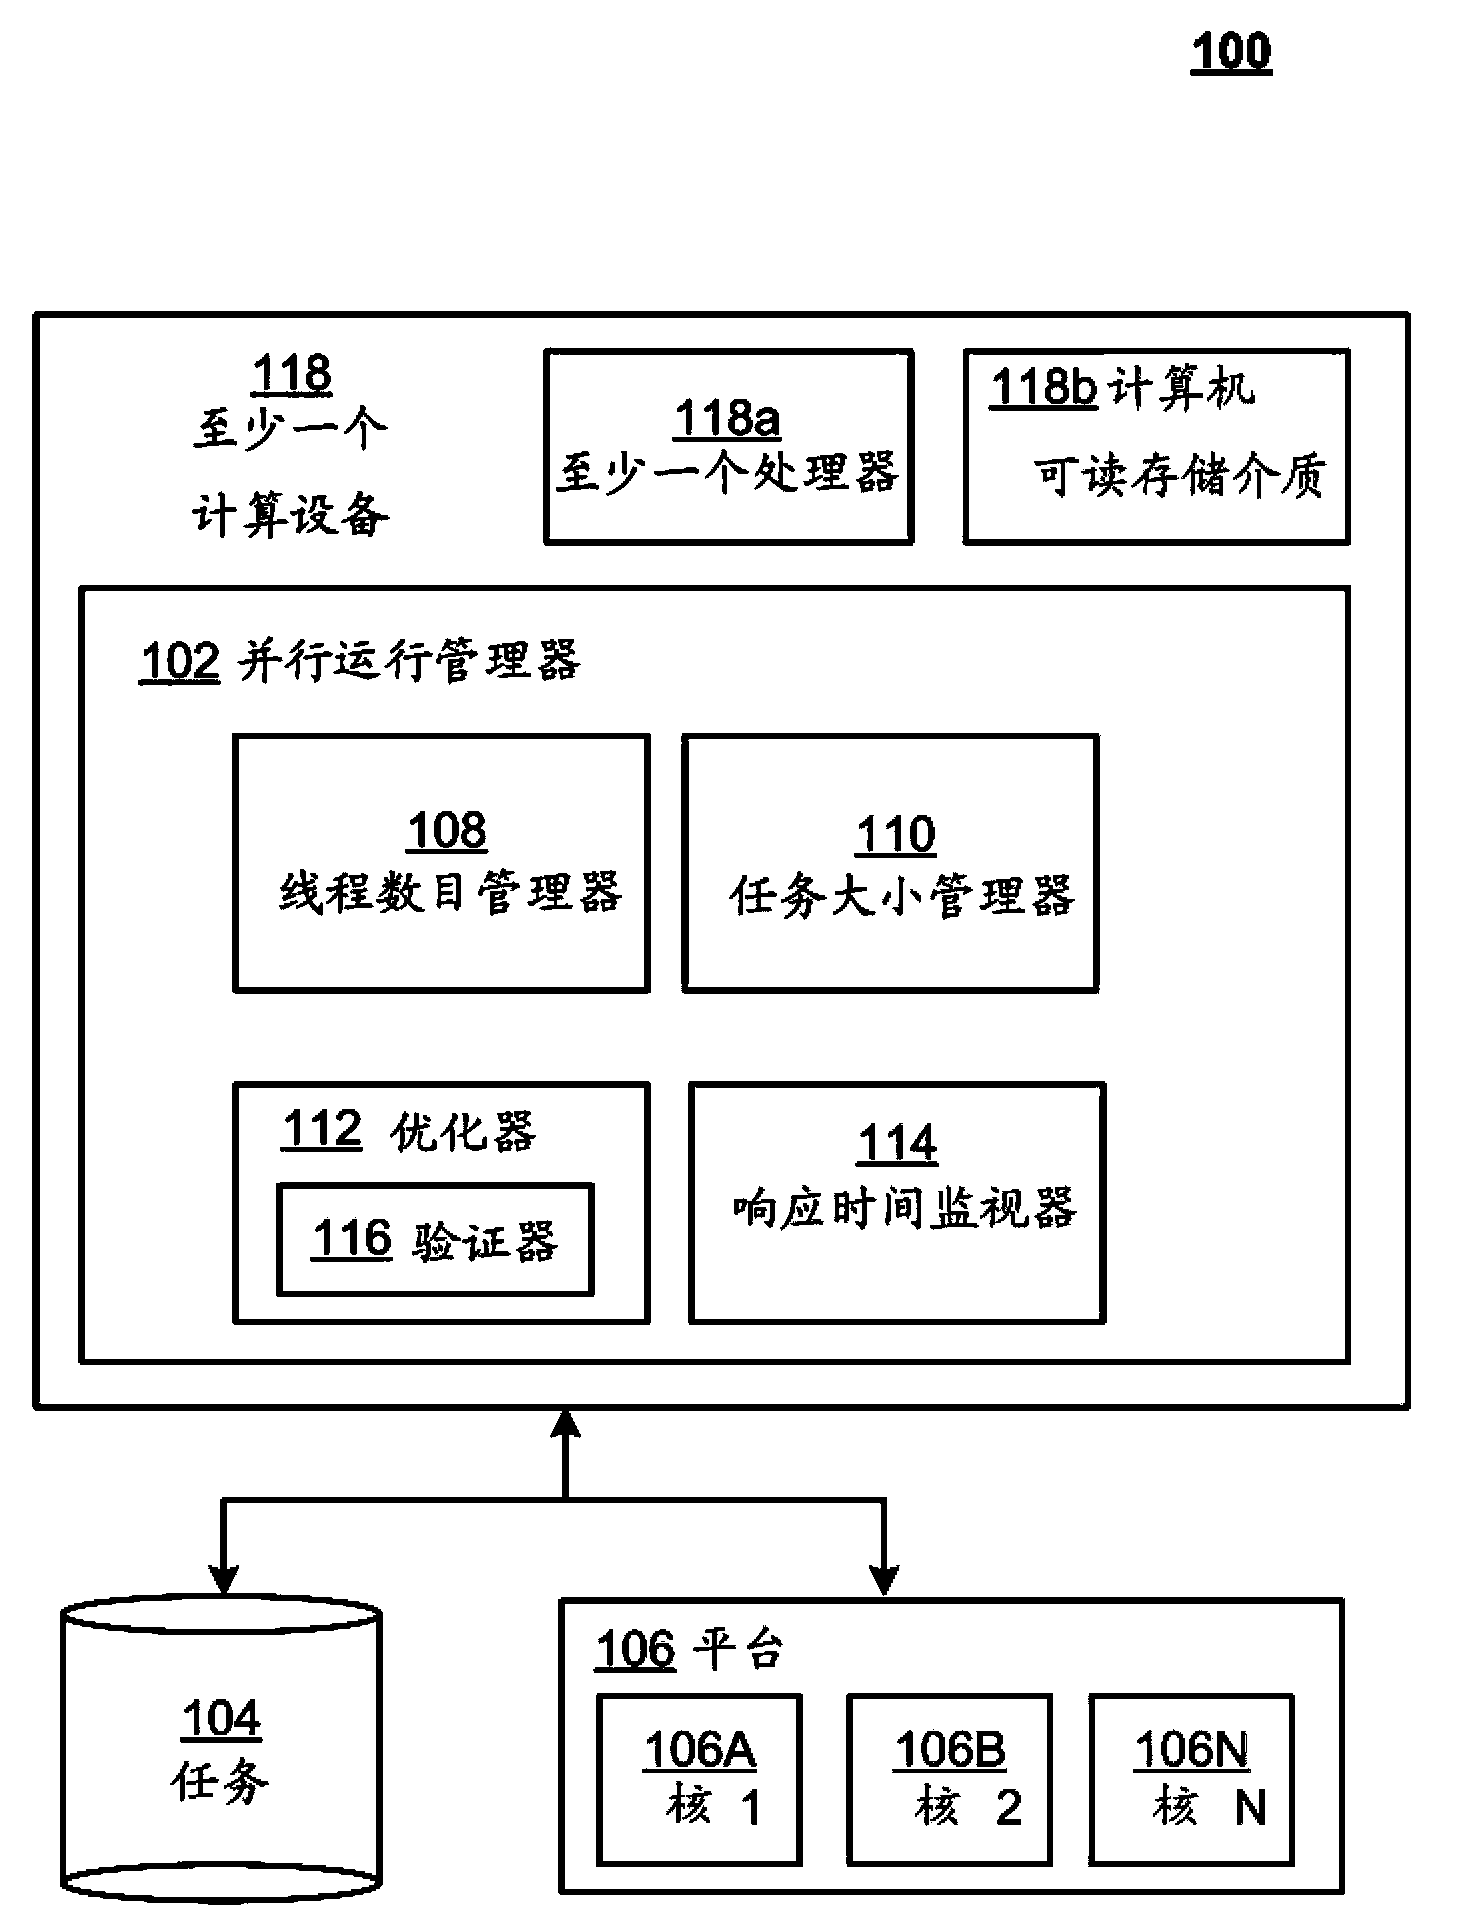 Feedback driving and adjusting system for efficient parallel running